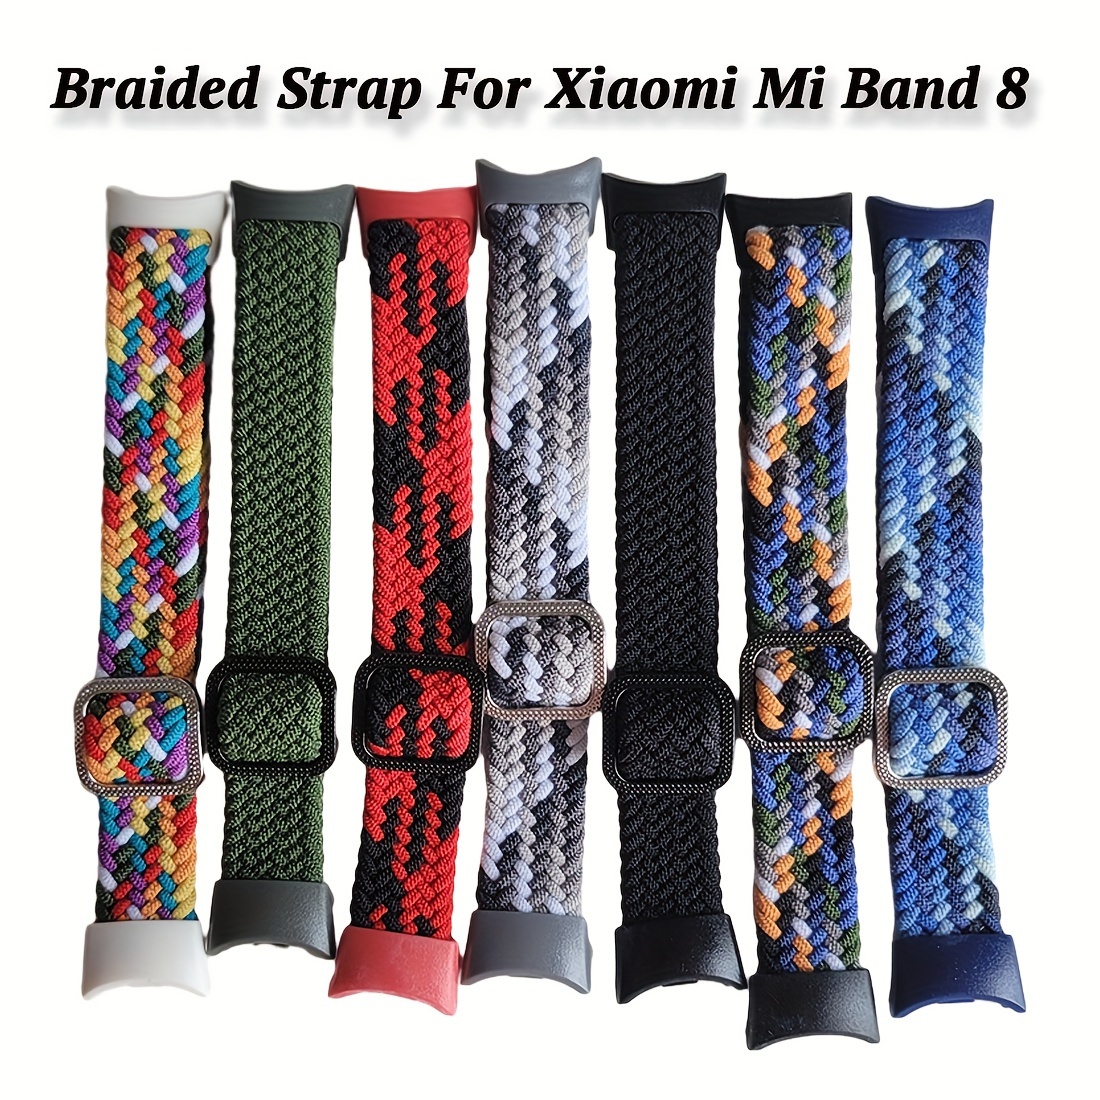 

Strap For Xiaomi Mi Band 8 Braided Elastic Nylon Straps Solo Loop, Adjustable Watchbands Bracelet For Miband 8 Nfc,ideal Choice Gifts For Birthday/easter/boy/girlfriend/family,(without Bracelet)